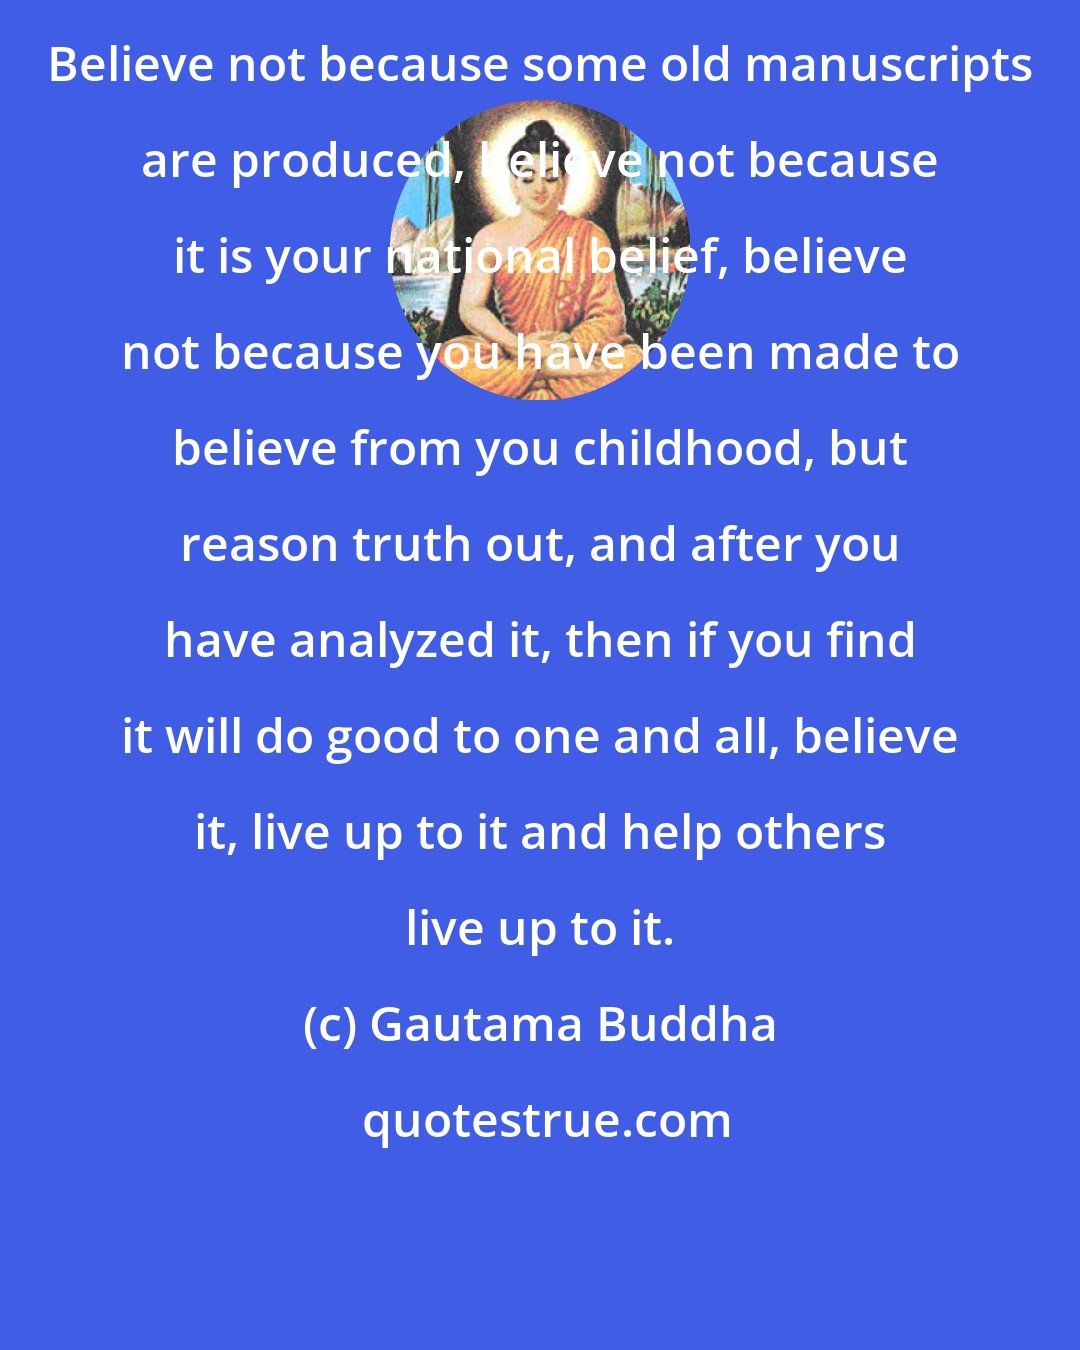 Gautama Buddha: Believe not because some old manuscripts are produced, believe not because it is your national belief, believe not because you have been made to believe from you childhood, but reason truth out, and after you have analyzed it, then if you find it will do good to one and all, believe it, live up to it and help others live up to it.